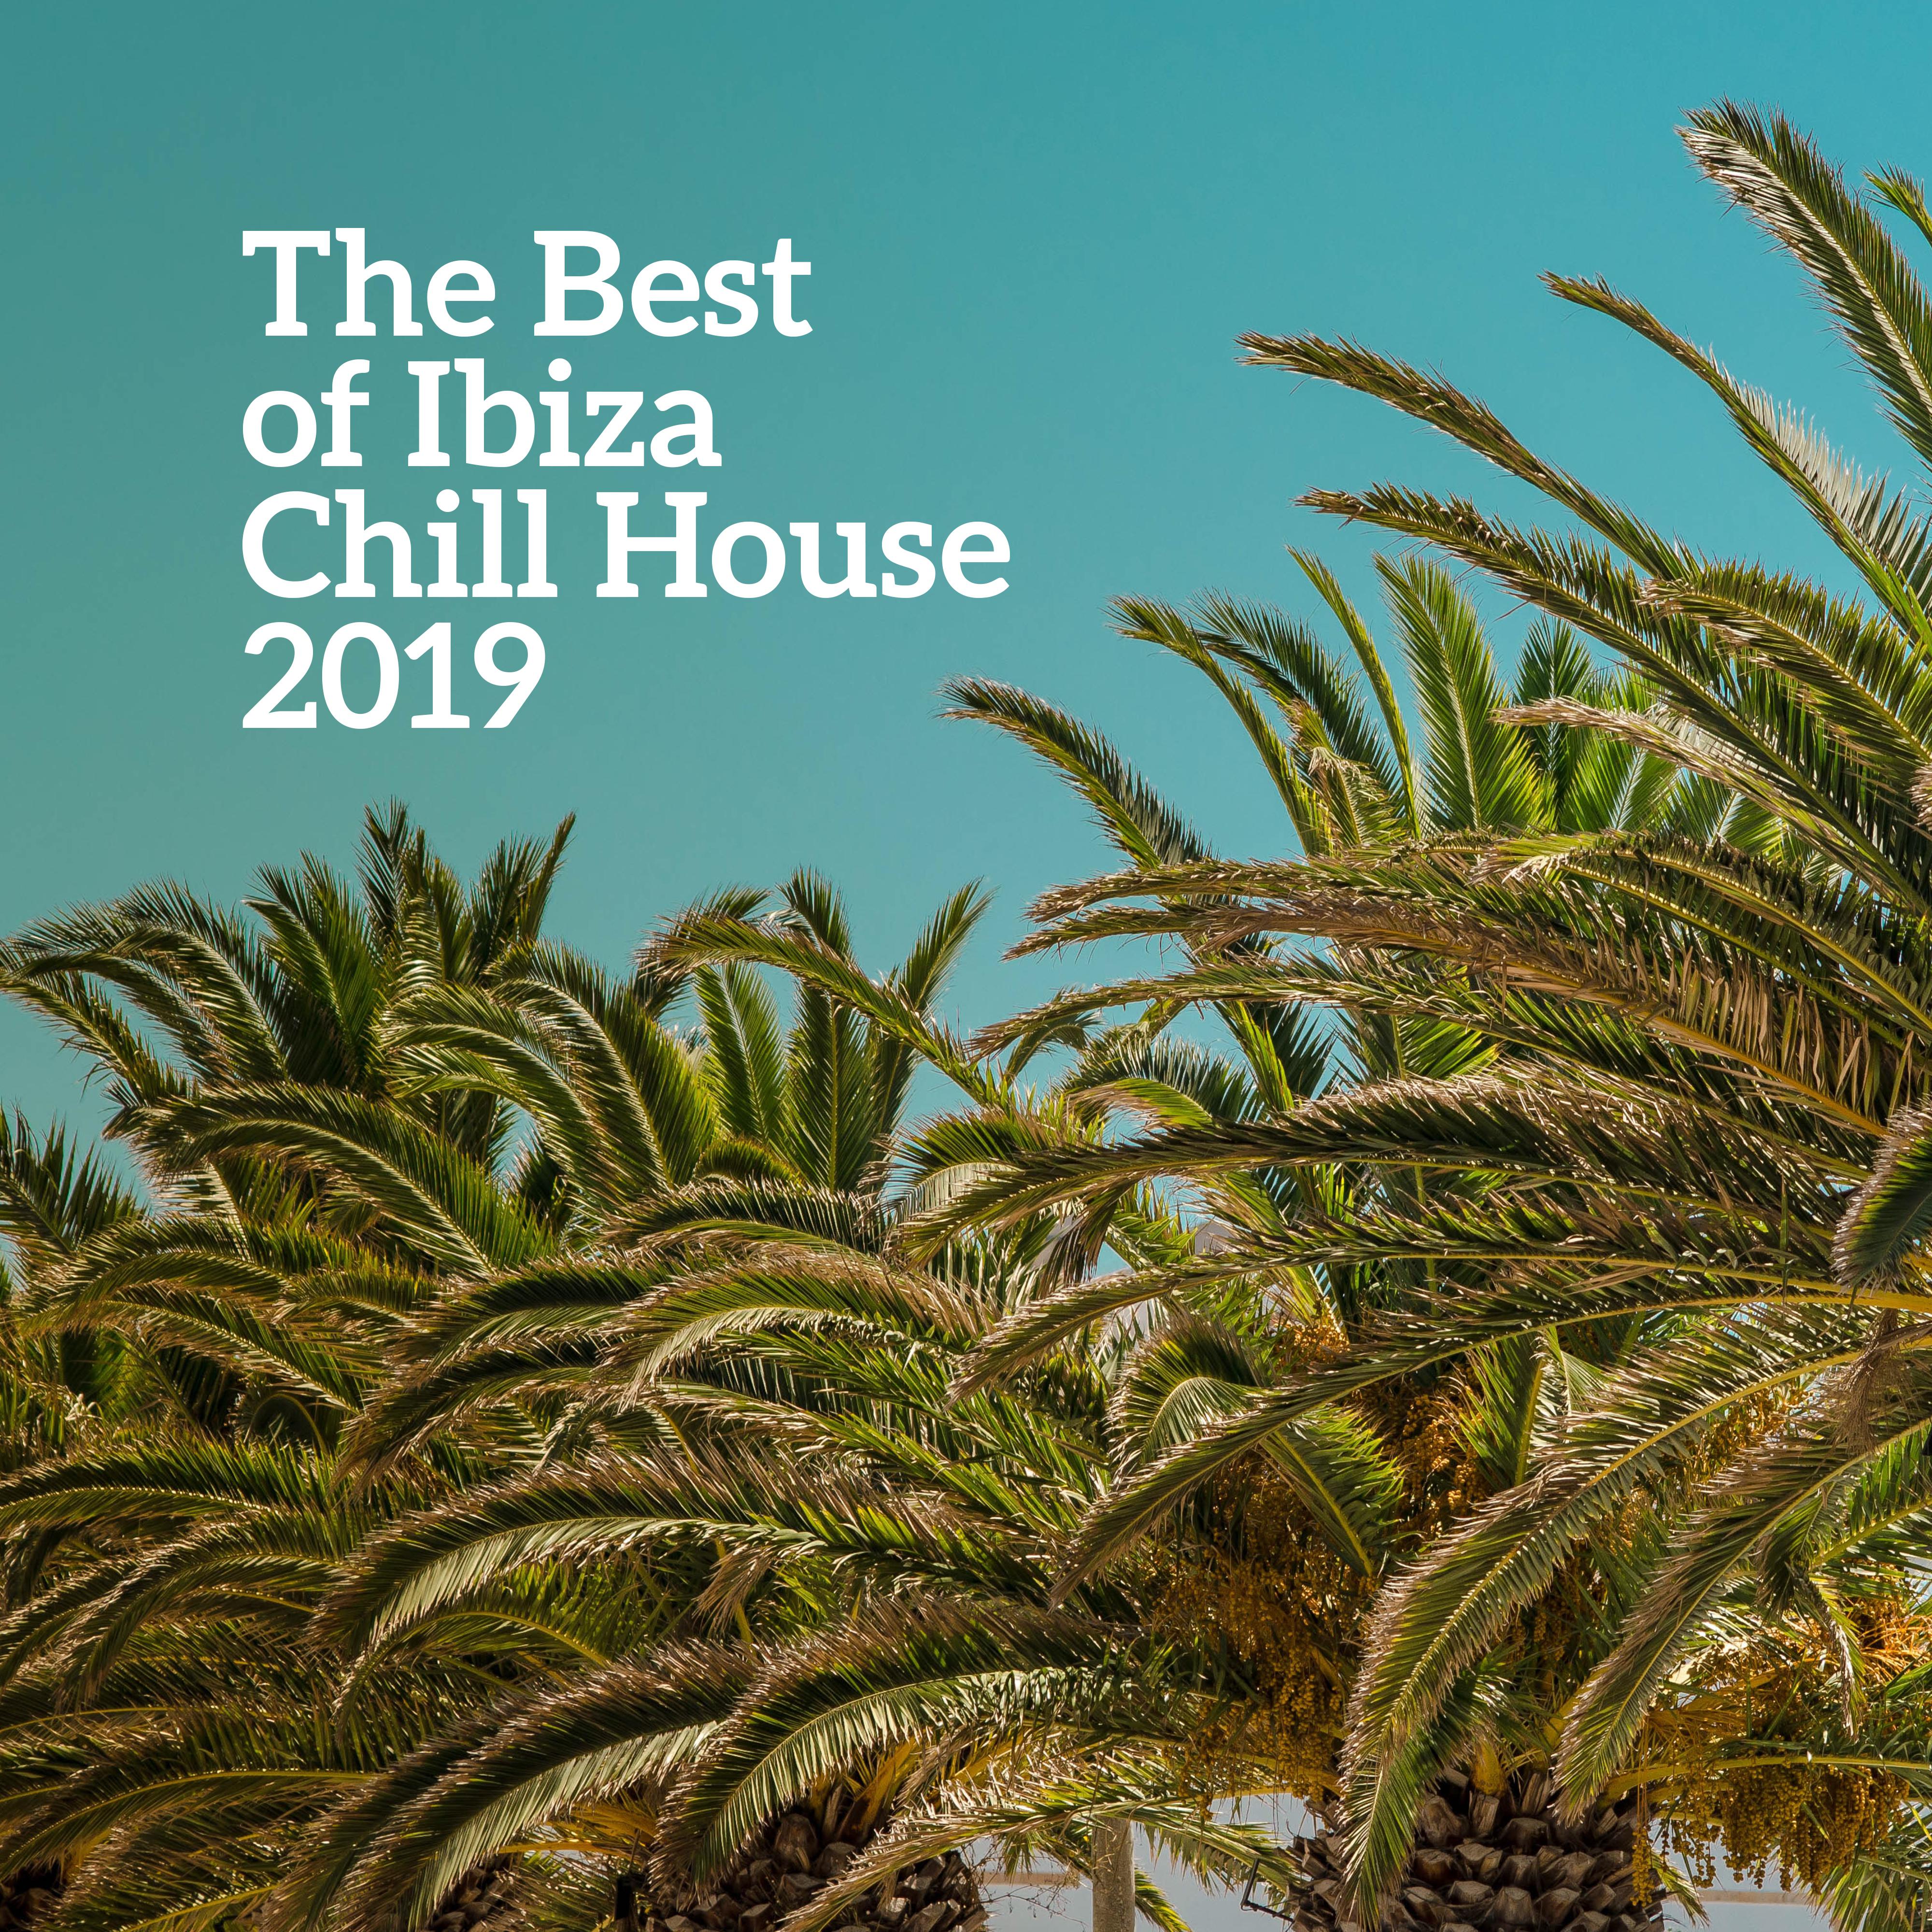 The Best of Ibiza Chill House 2019